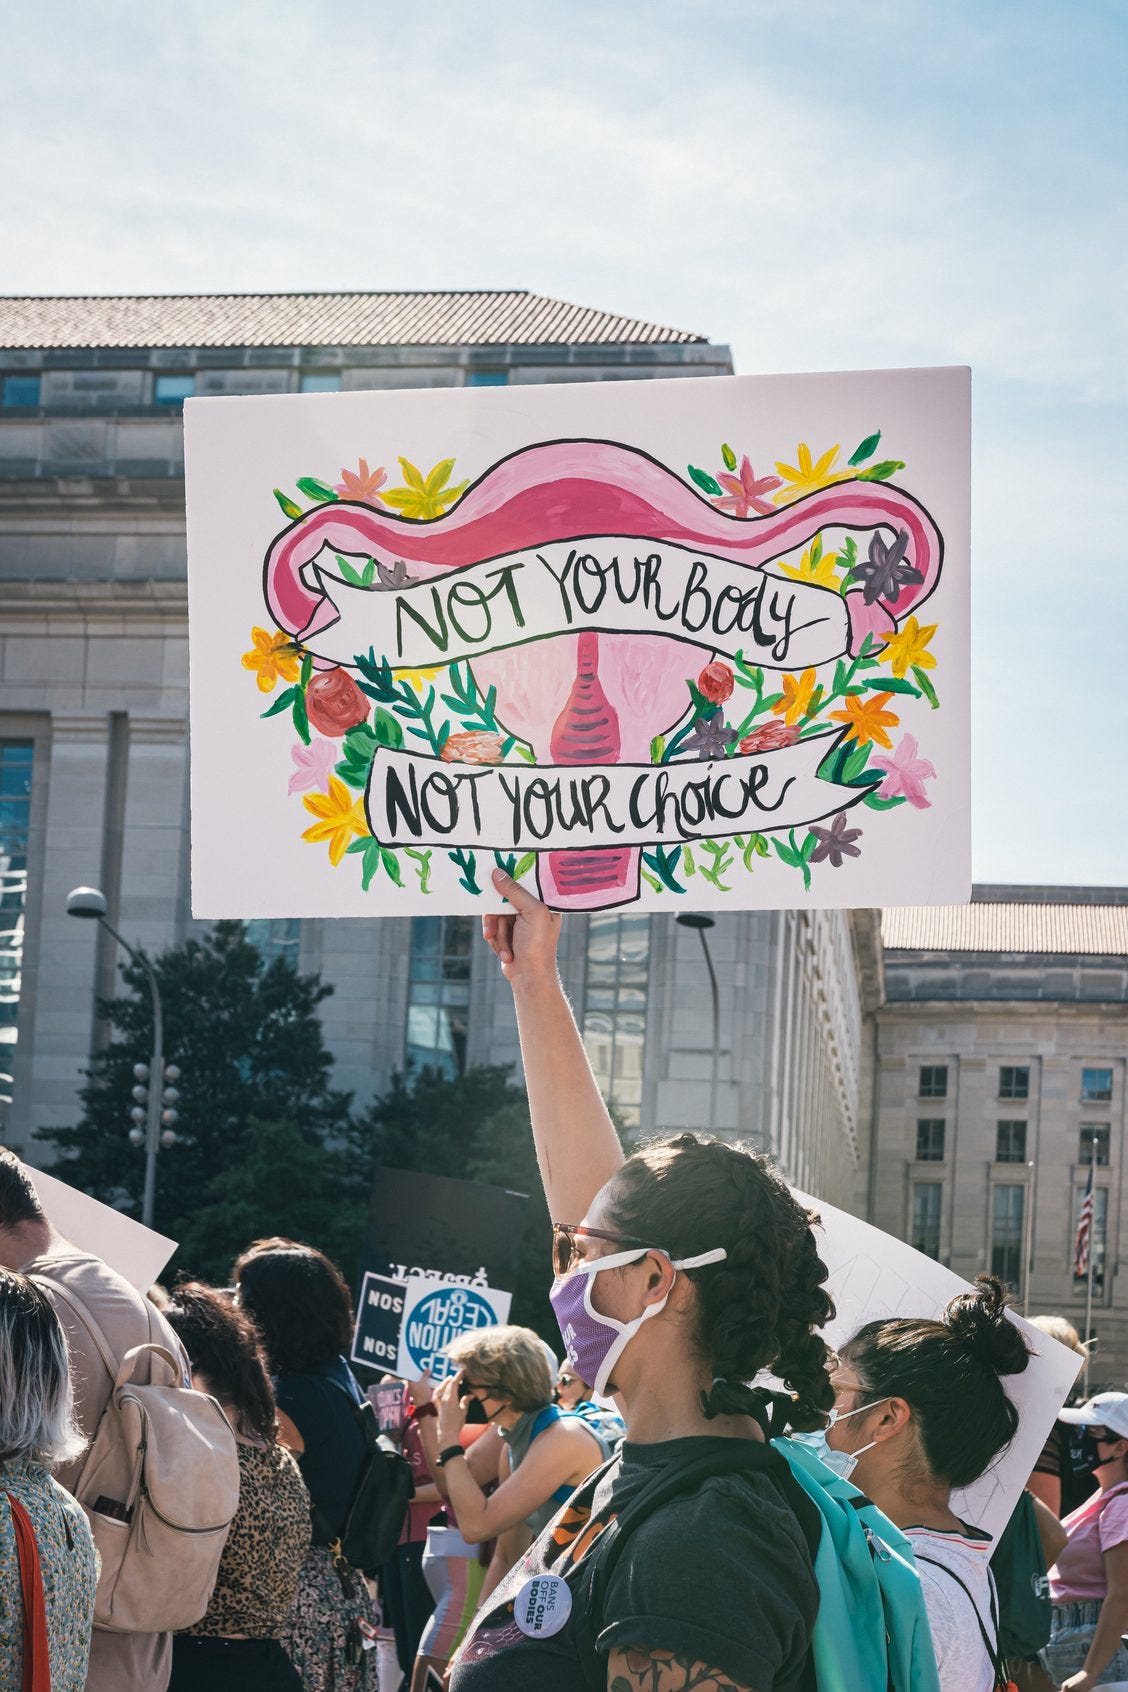 Focus on protest sign with painted uterus and fallopian tubes, across which is written in 2 separate banners " Not your body" "not your choice". Sign held high above head of women marching in US city.